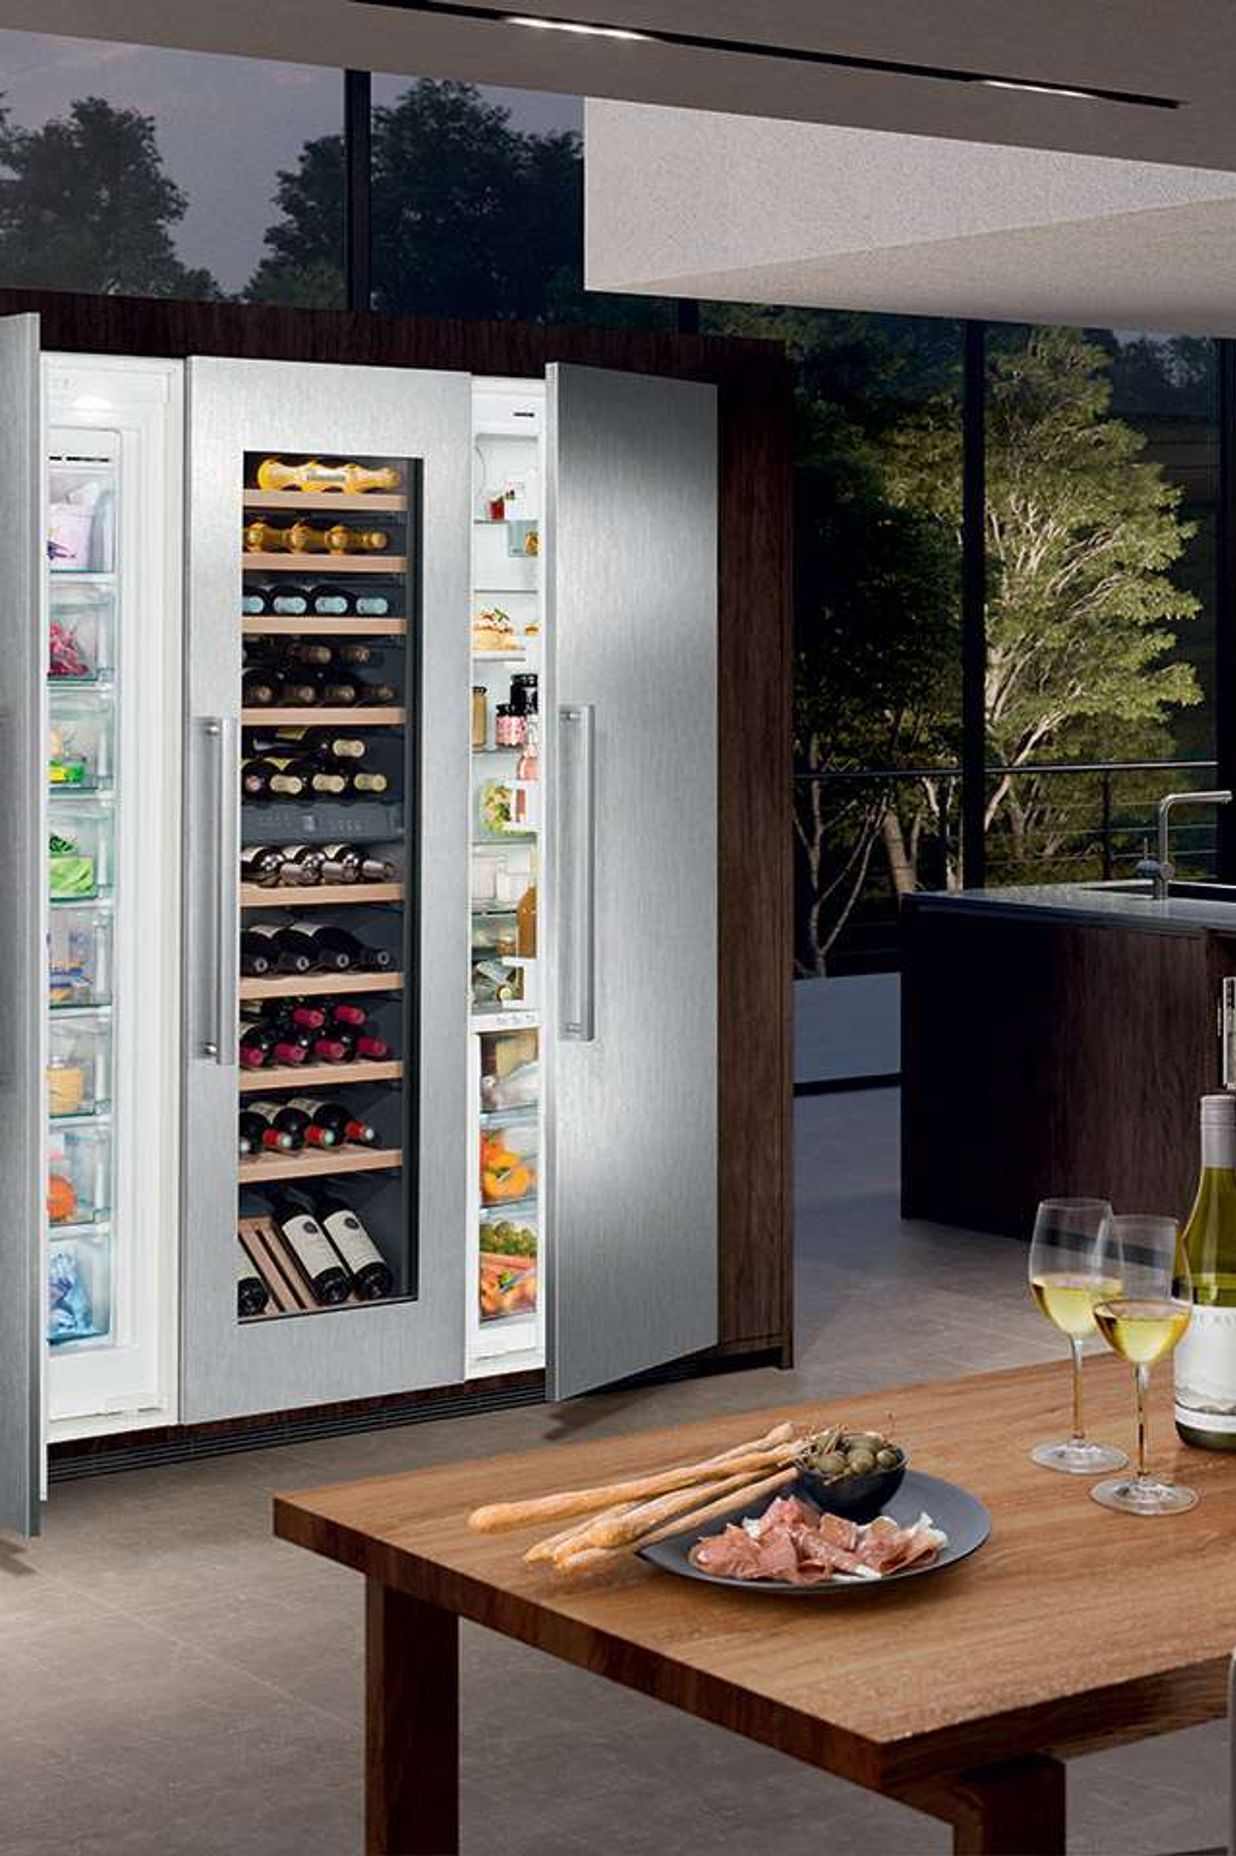 Liebherr EWTdf 3553 Built-In Dual Zone Wine Cellar with Optional Stainless Steel Door Kit. Paired with fully integrated freezer and fridge.